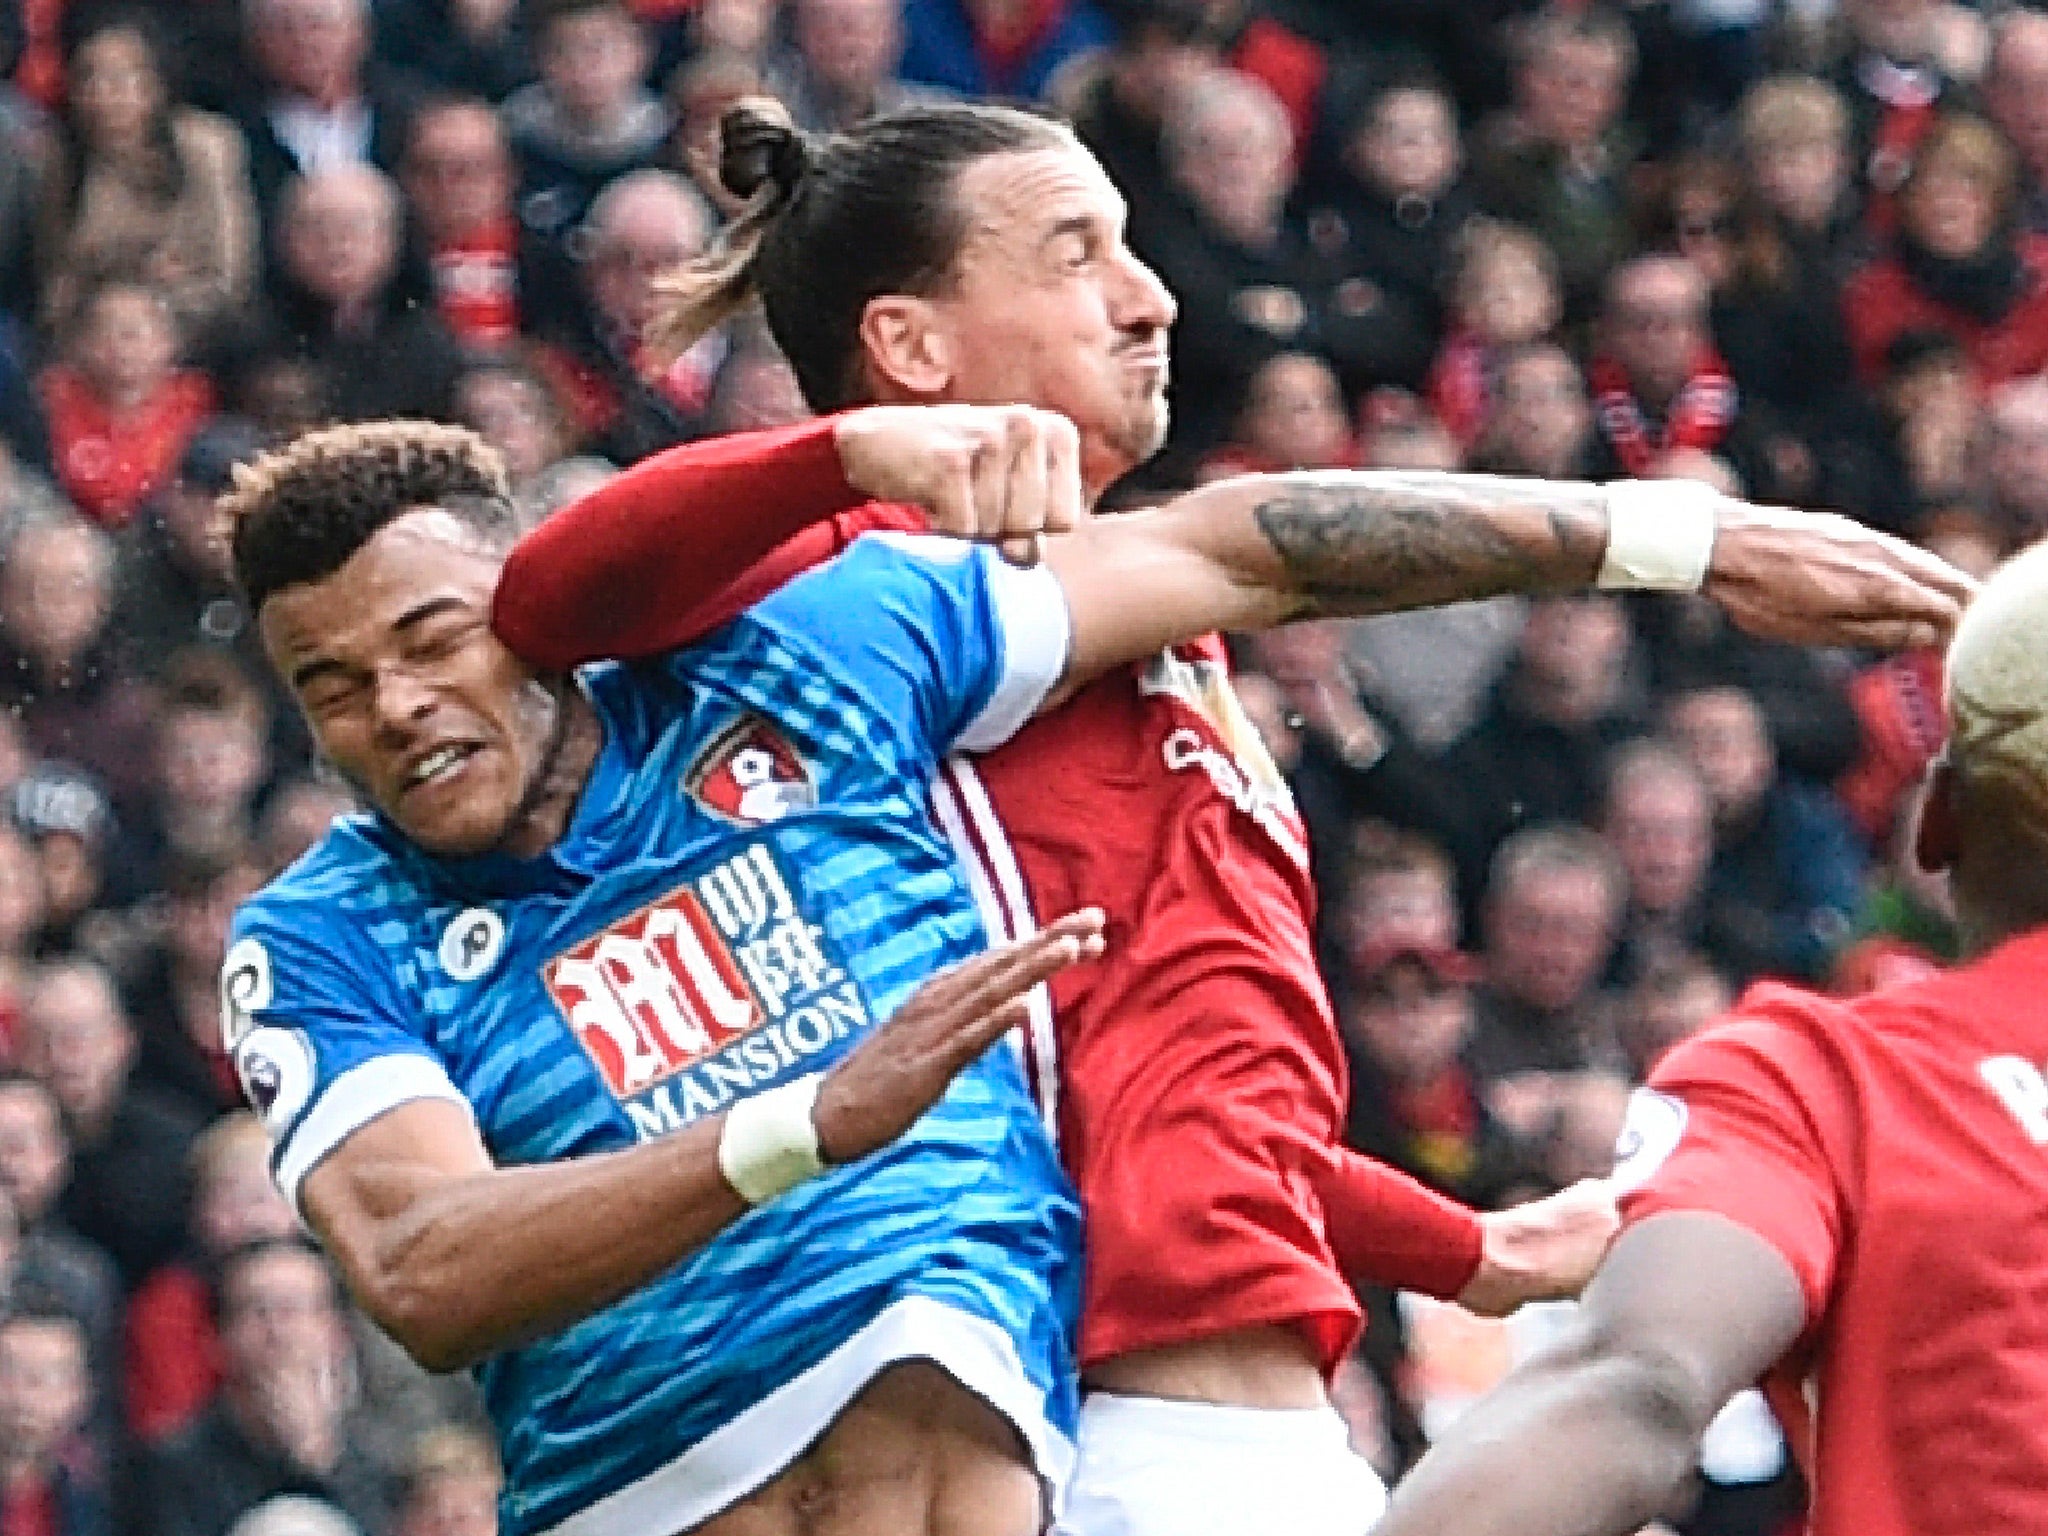 Zlatan Ibrahimovic and Tyrone Mings are set to find out their punishment from the FA